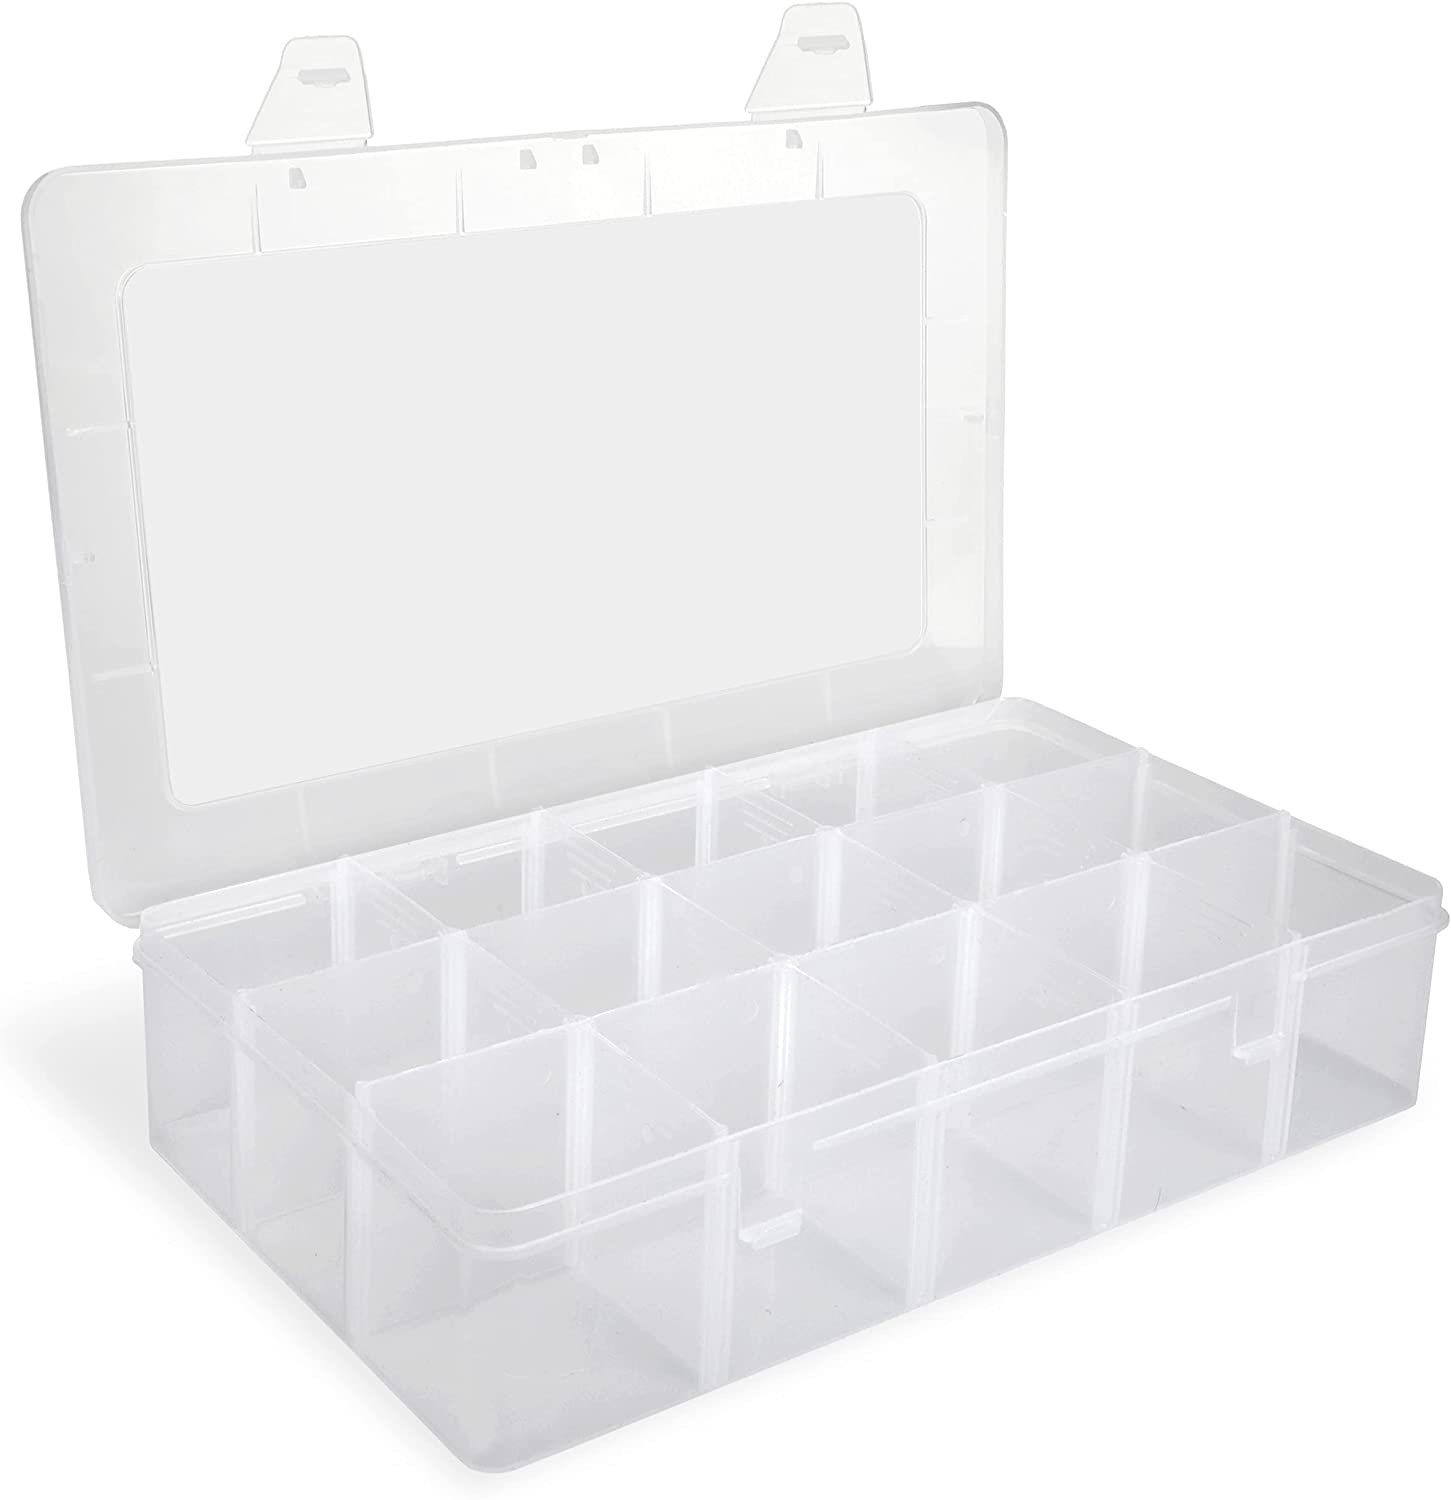 pantryX Plastic Organizer Box with dividers for Bead Organizer, Fishing Tackles, Jewelry, Craft Organizers and Storage with Adjustable dividers